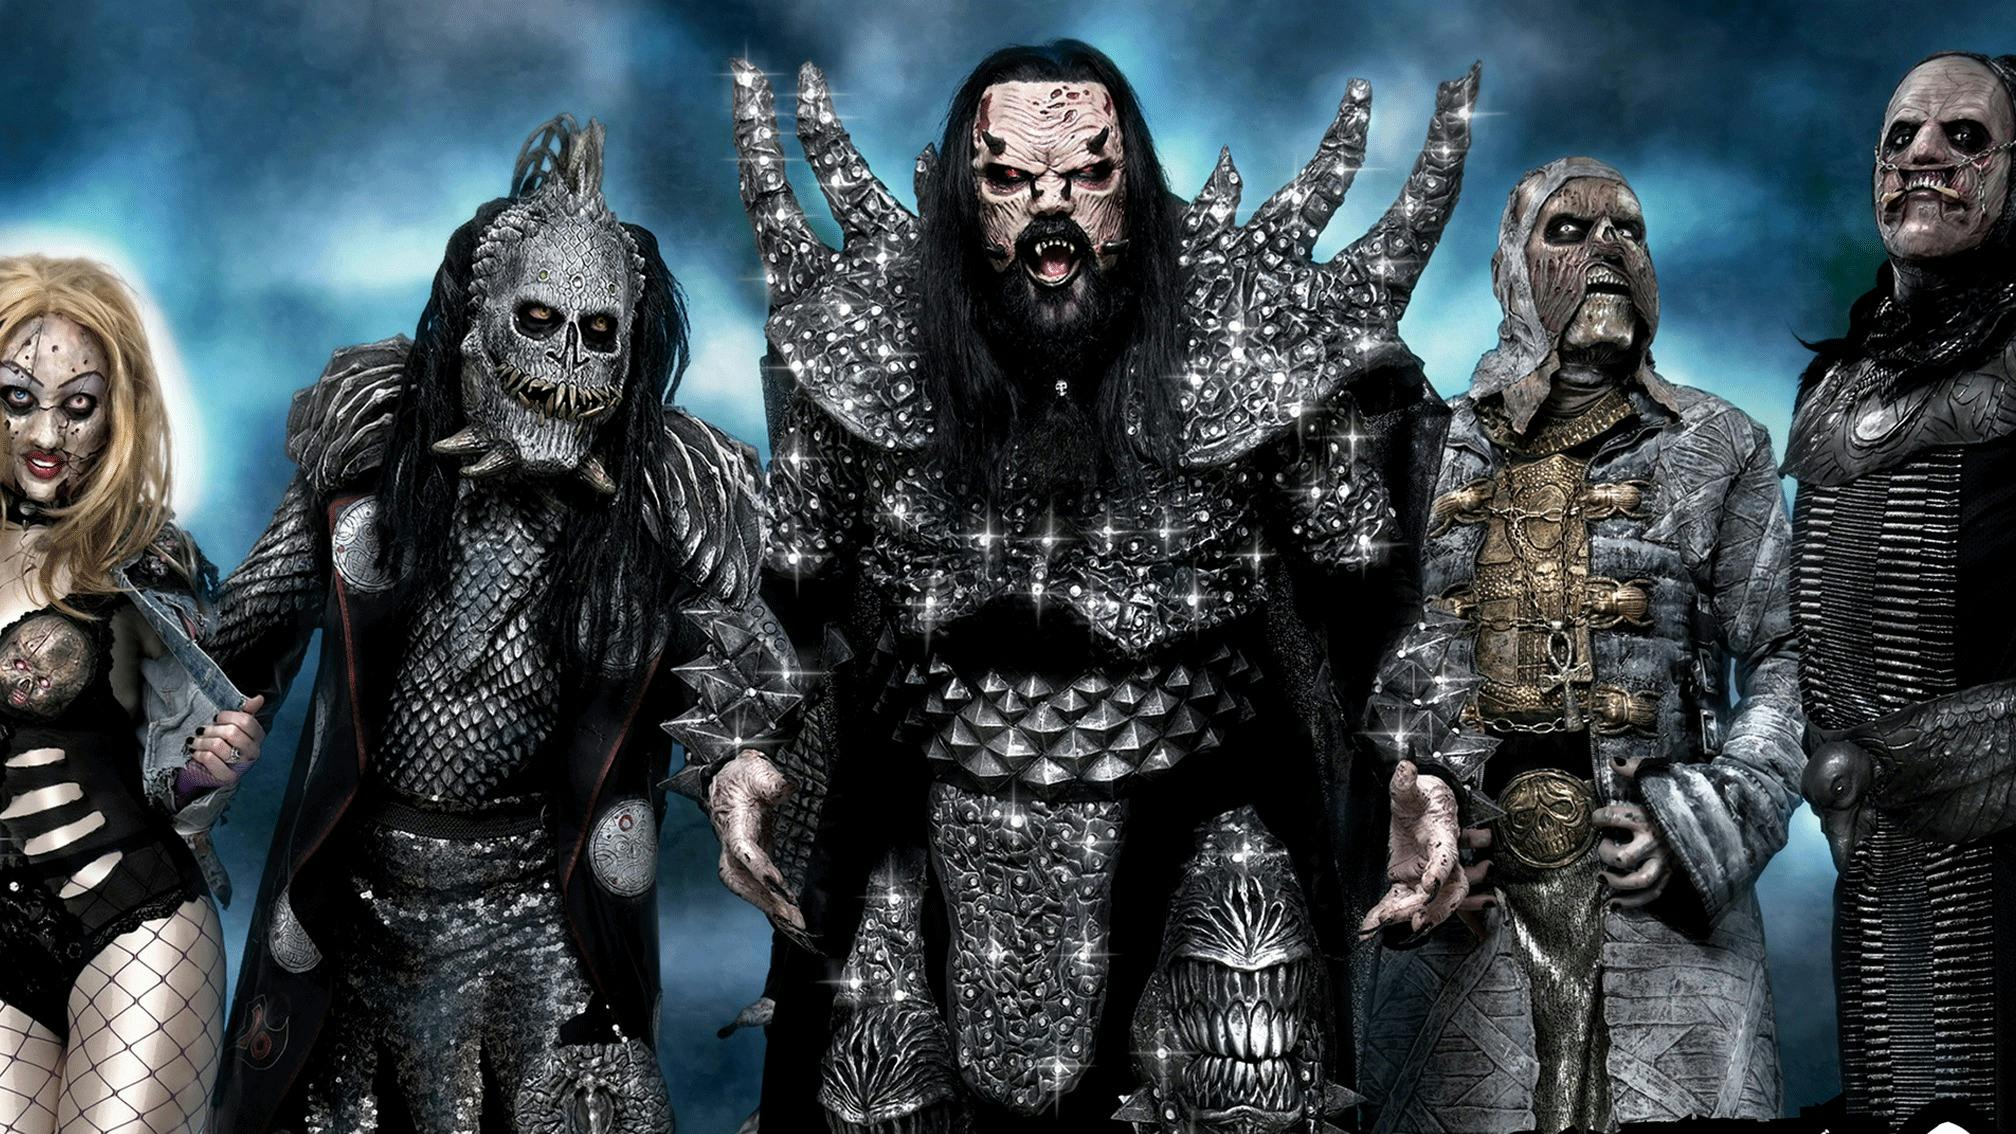 Lordi team up with PETA to condemn animal testing: “Animals’ lives are worth more than a lipstick or a bottle of shampoo”